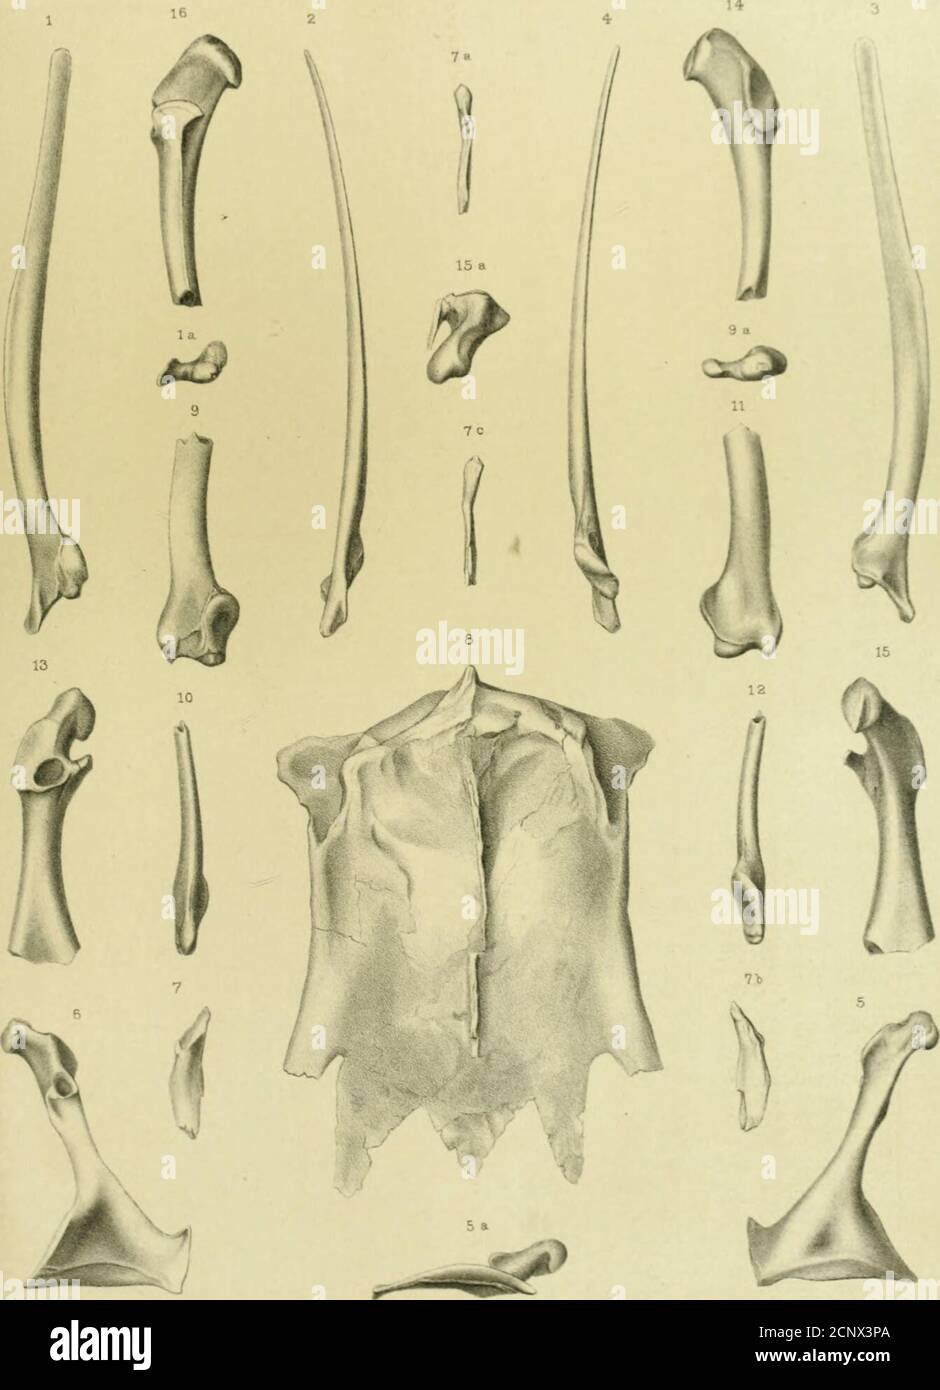 . Report of the geological exploration of the fortieth parallel . r inferior, view, i^ -Right coracoid of Apatornis celer; anterior view, j^45 5a —Sternal end. -Riglit coracoid of Apatornis celer; posterior view, 145 ■Upper portion of clavicle of Apatornis celer; exterior view, 147 7a— Posterior view.Jb— Inner view.7c— Anterior view. ■Sternum of Apatornis celer; infei-ior view, 148 ■Left scapula of Tchthyomis victor Marsh ; exterior view, 141 9a—Proximal end. ■Left scapula of Ichthyornis victor; anterior, or exterior, view, 141 •Left scapula of IcMhyomis victor; inner view, 141 ■Left scapula o Stock Photo